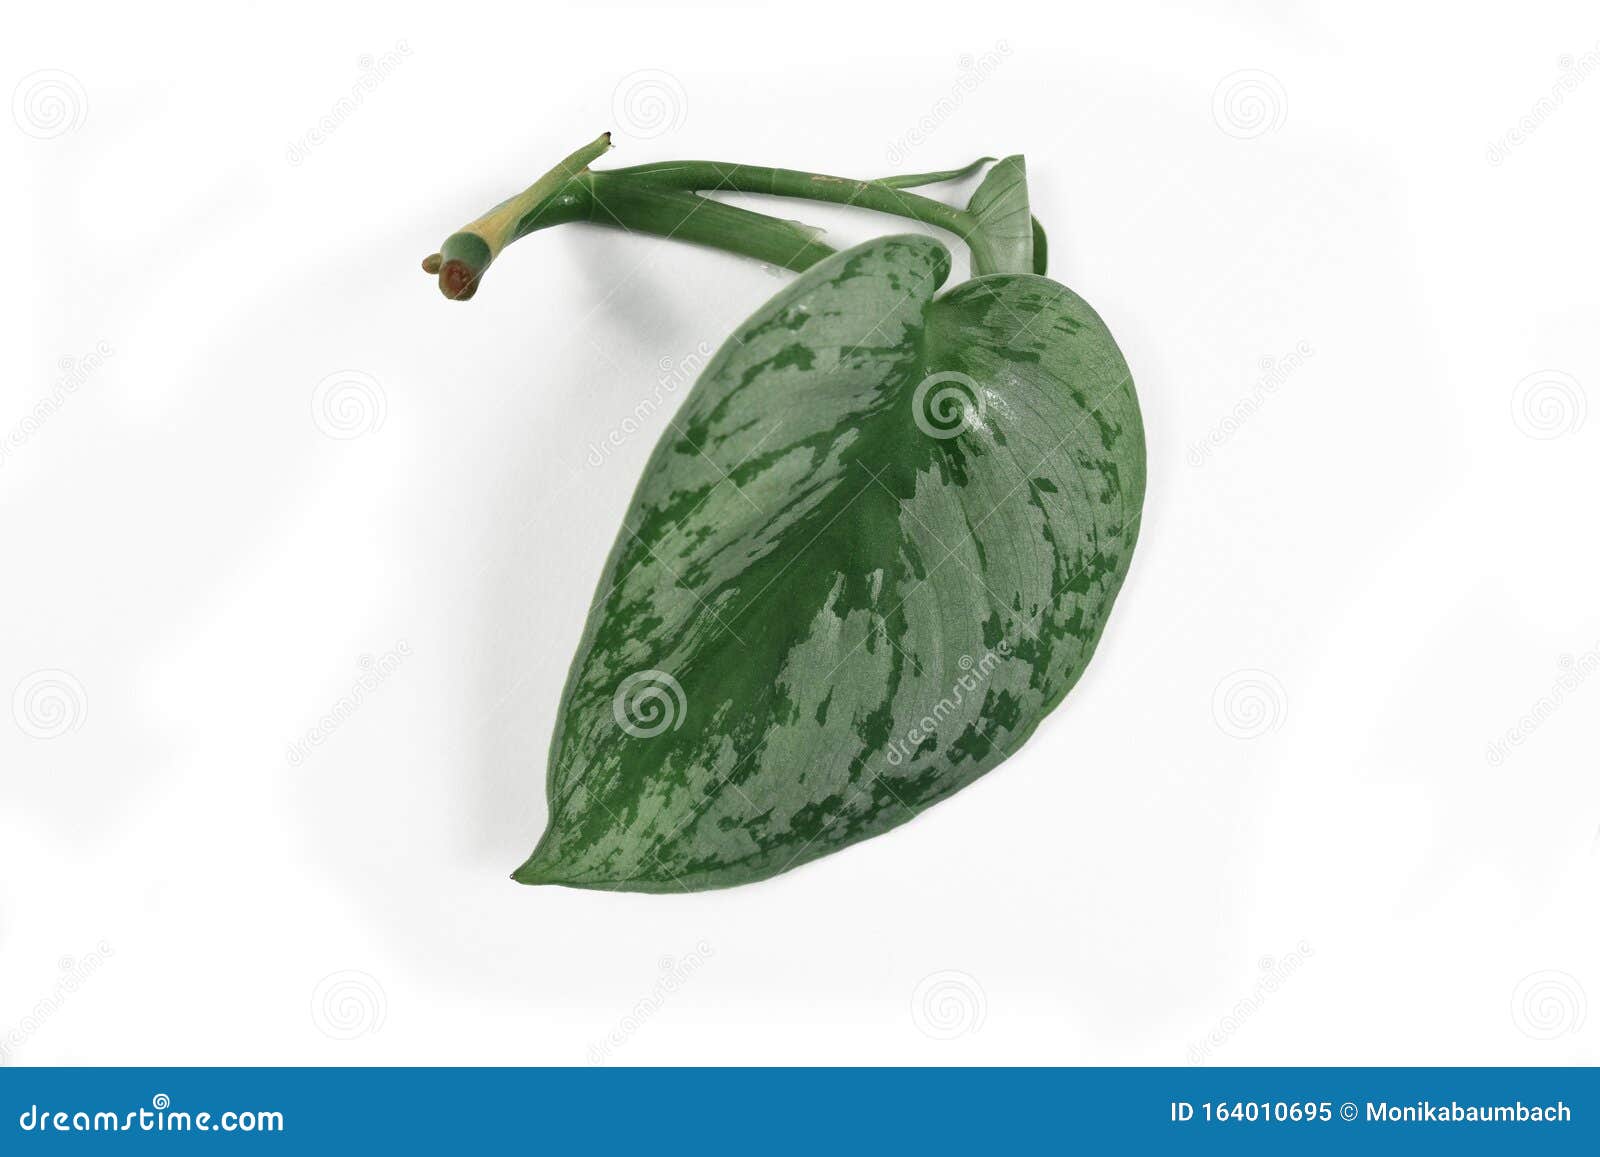 plant cutting with stem and single leaf of a tropical `scindapsus pictus exotica` pothos houseplant with satin texture